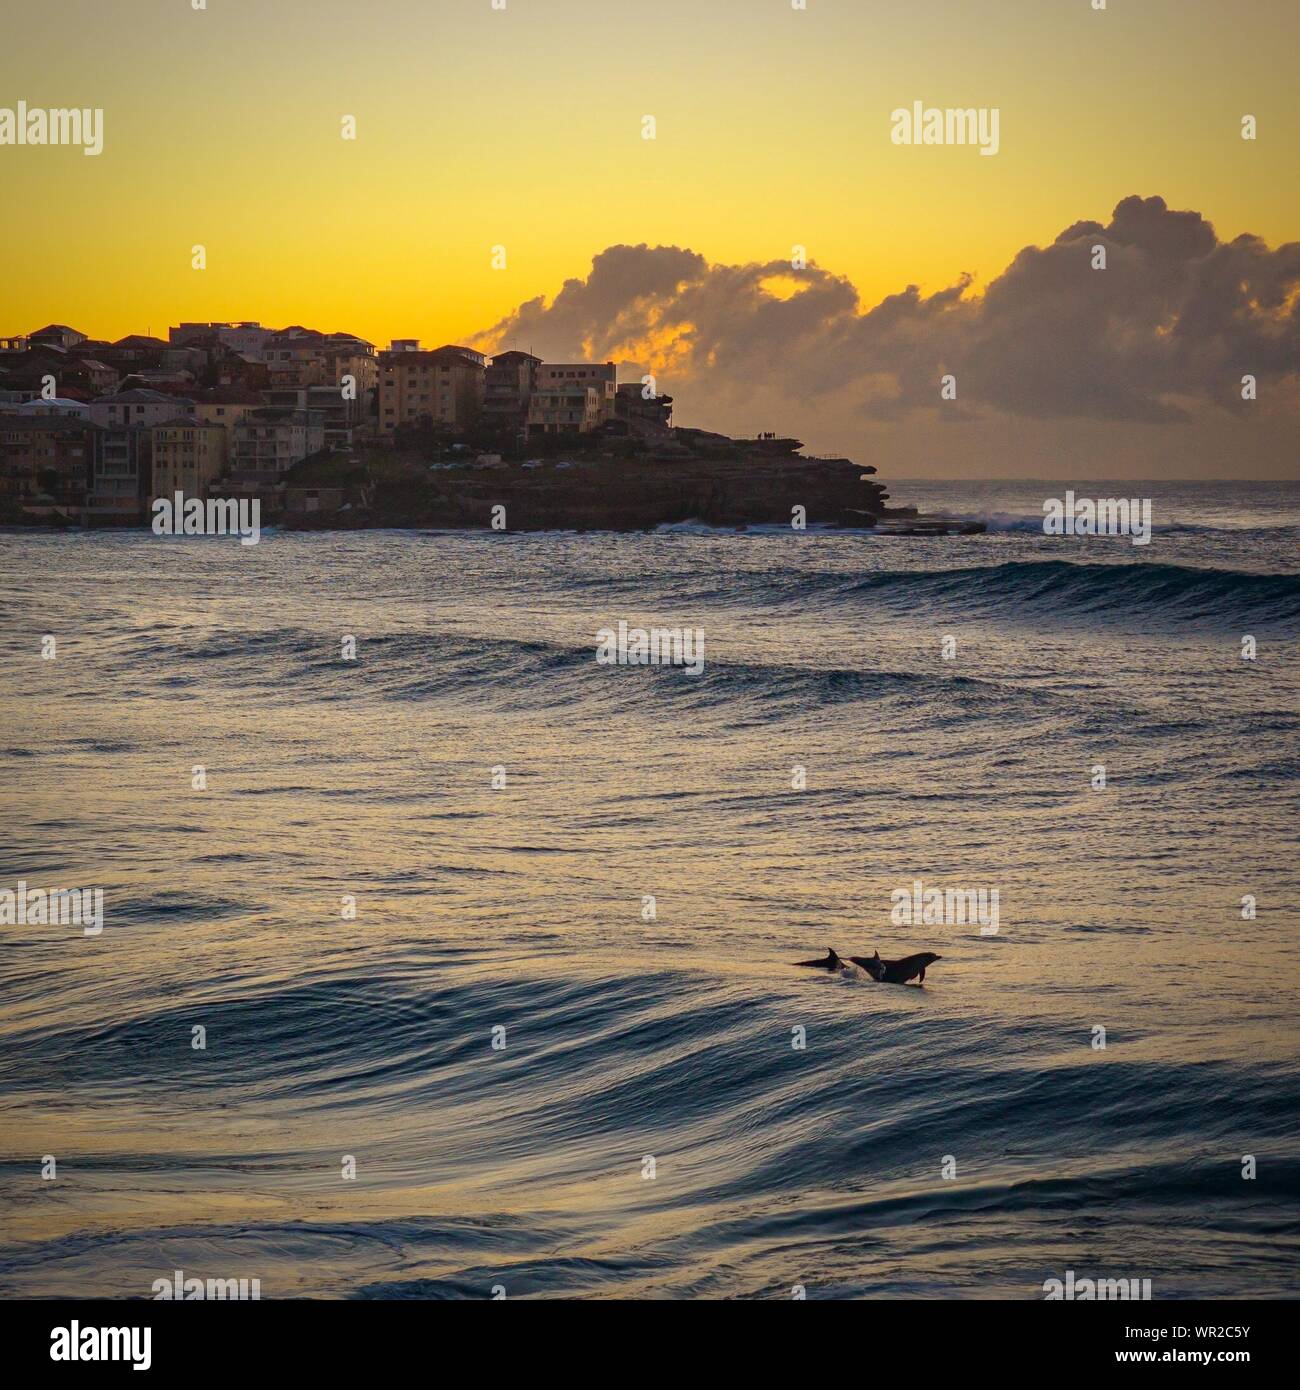 Dolphin Diving Into Water Buildings Against Sunset Sky Stock Photo